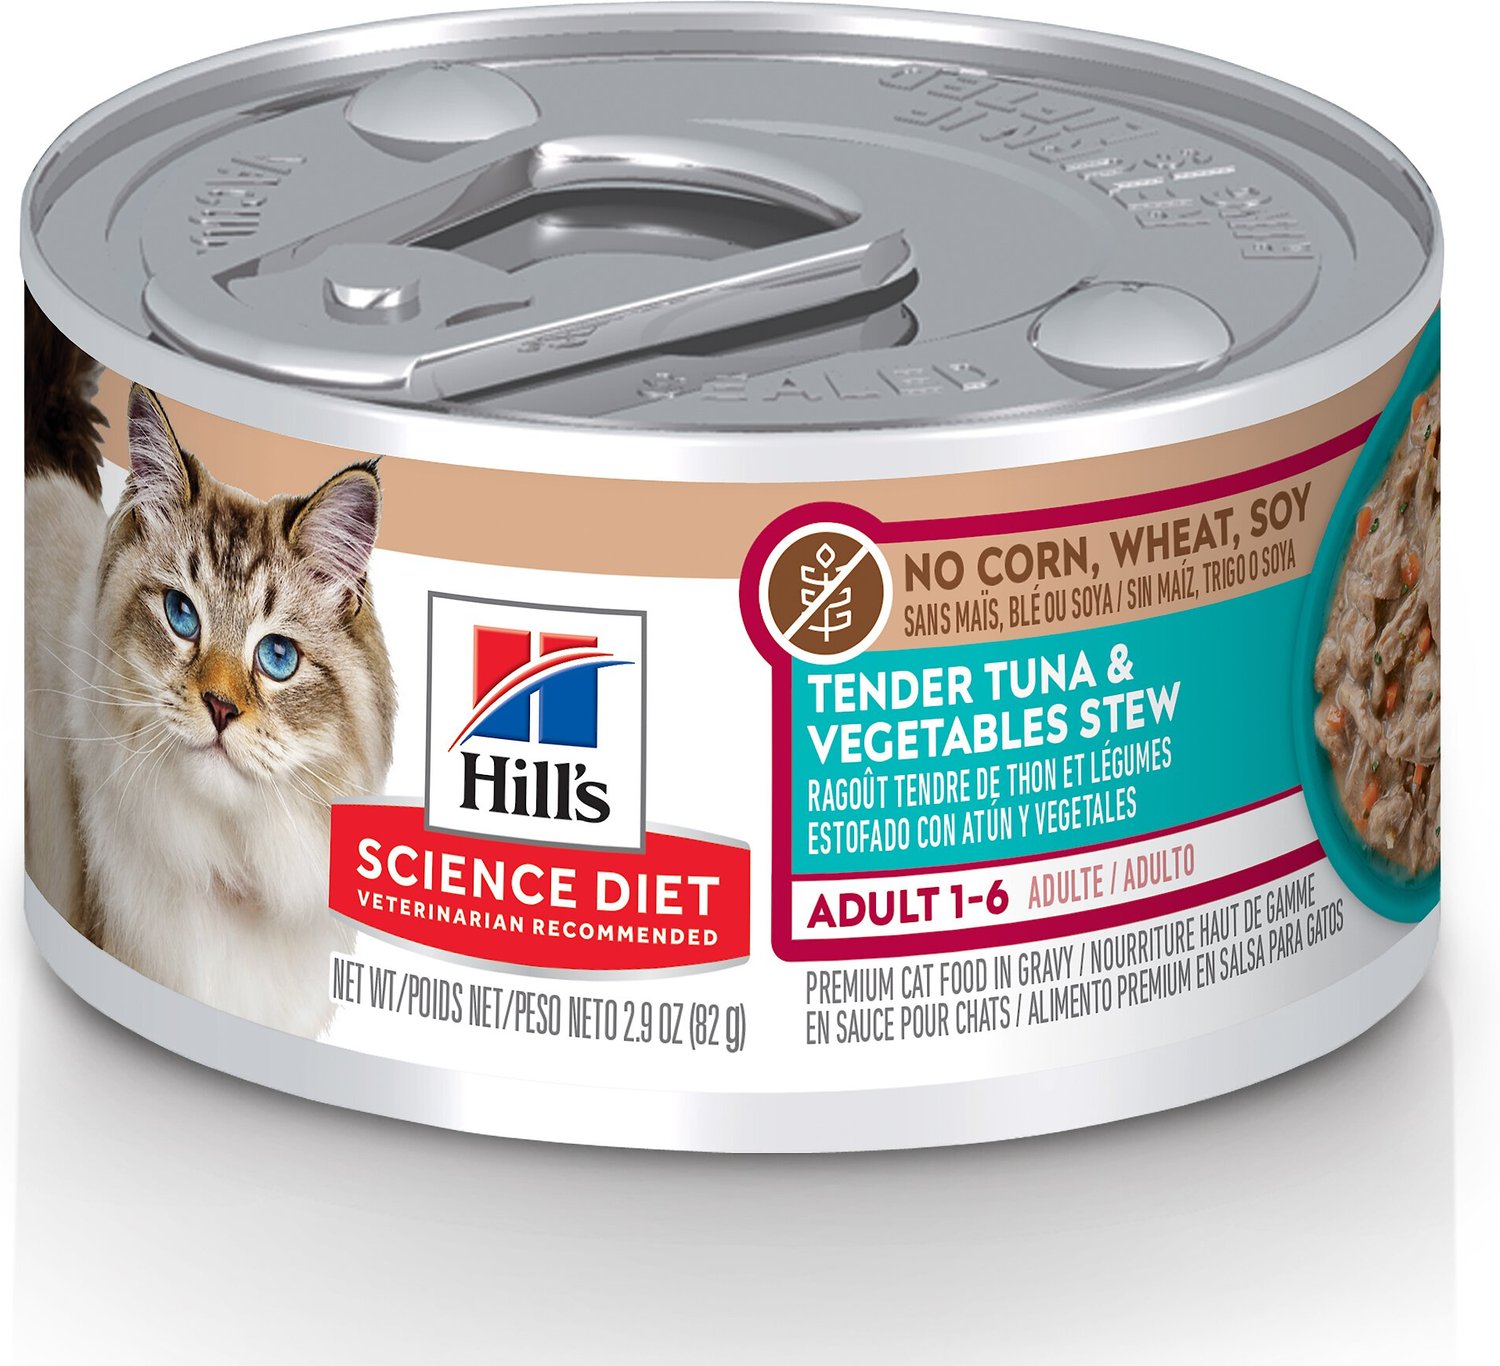 HILL'S SCIENCE DIET Adult 16 Tender Tuna & Vegetables Stew Canned Cat